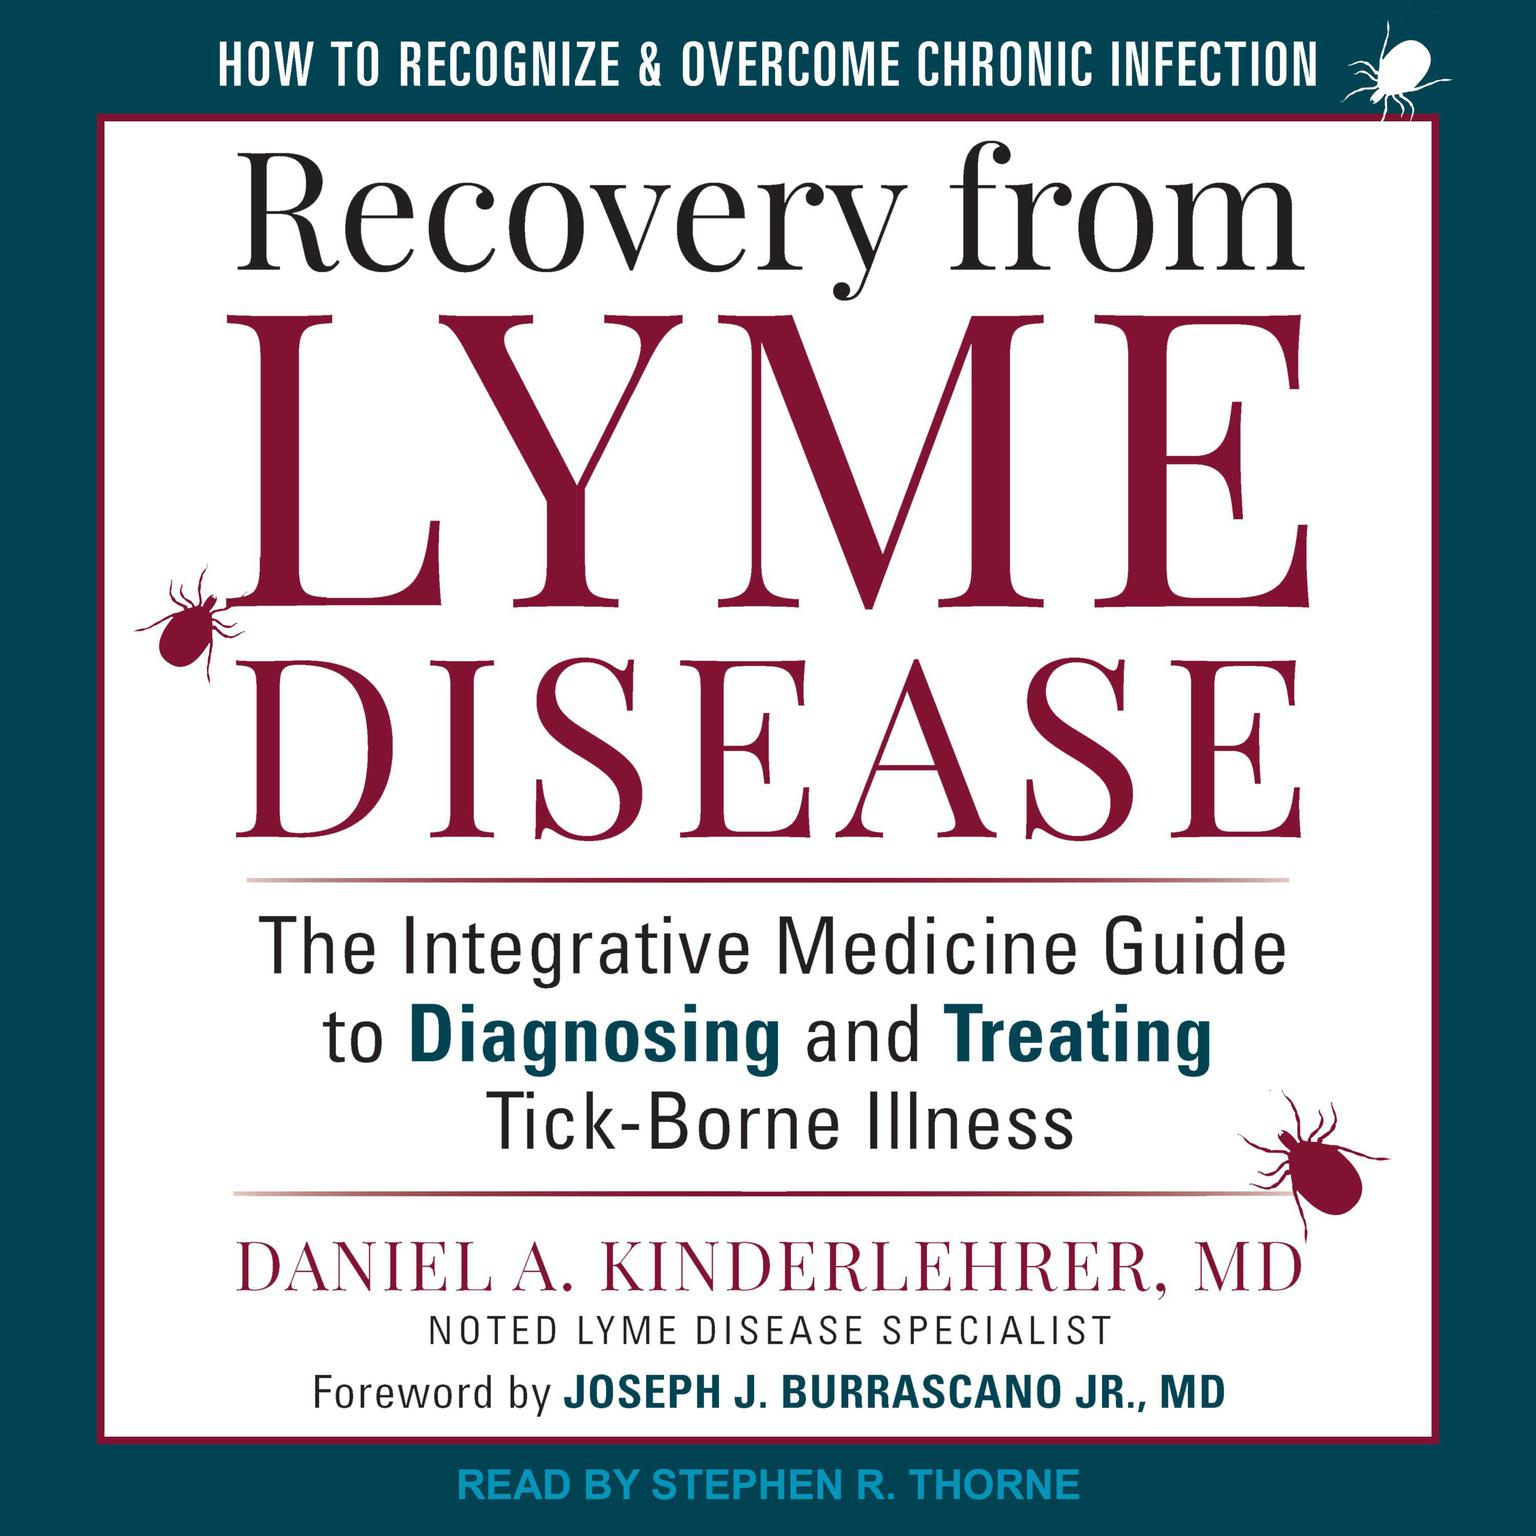 Recovery from Lyme Disease: The Integrative Medicine Guide to Diagnosing and Treating Tick-Borne Illness Audiobook, by Daniel A. Kinderlehrer